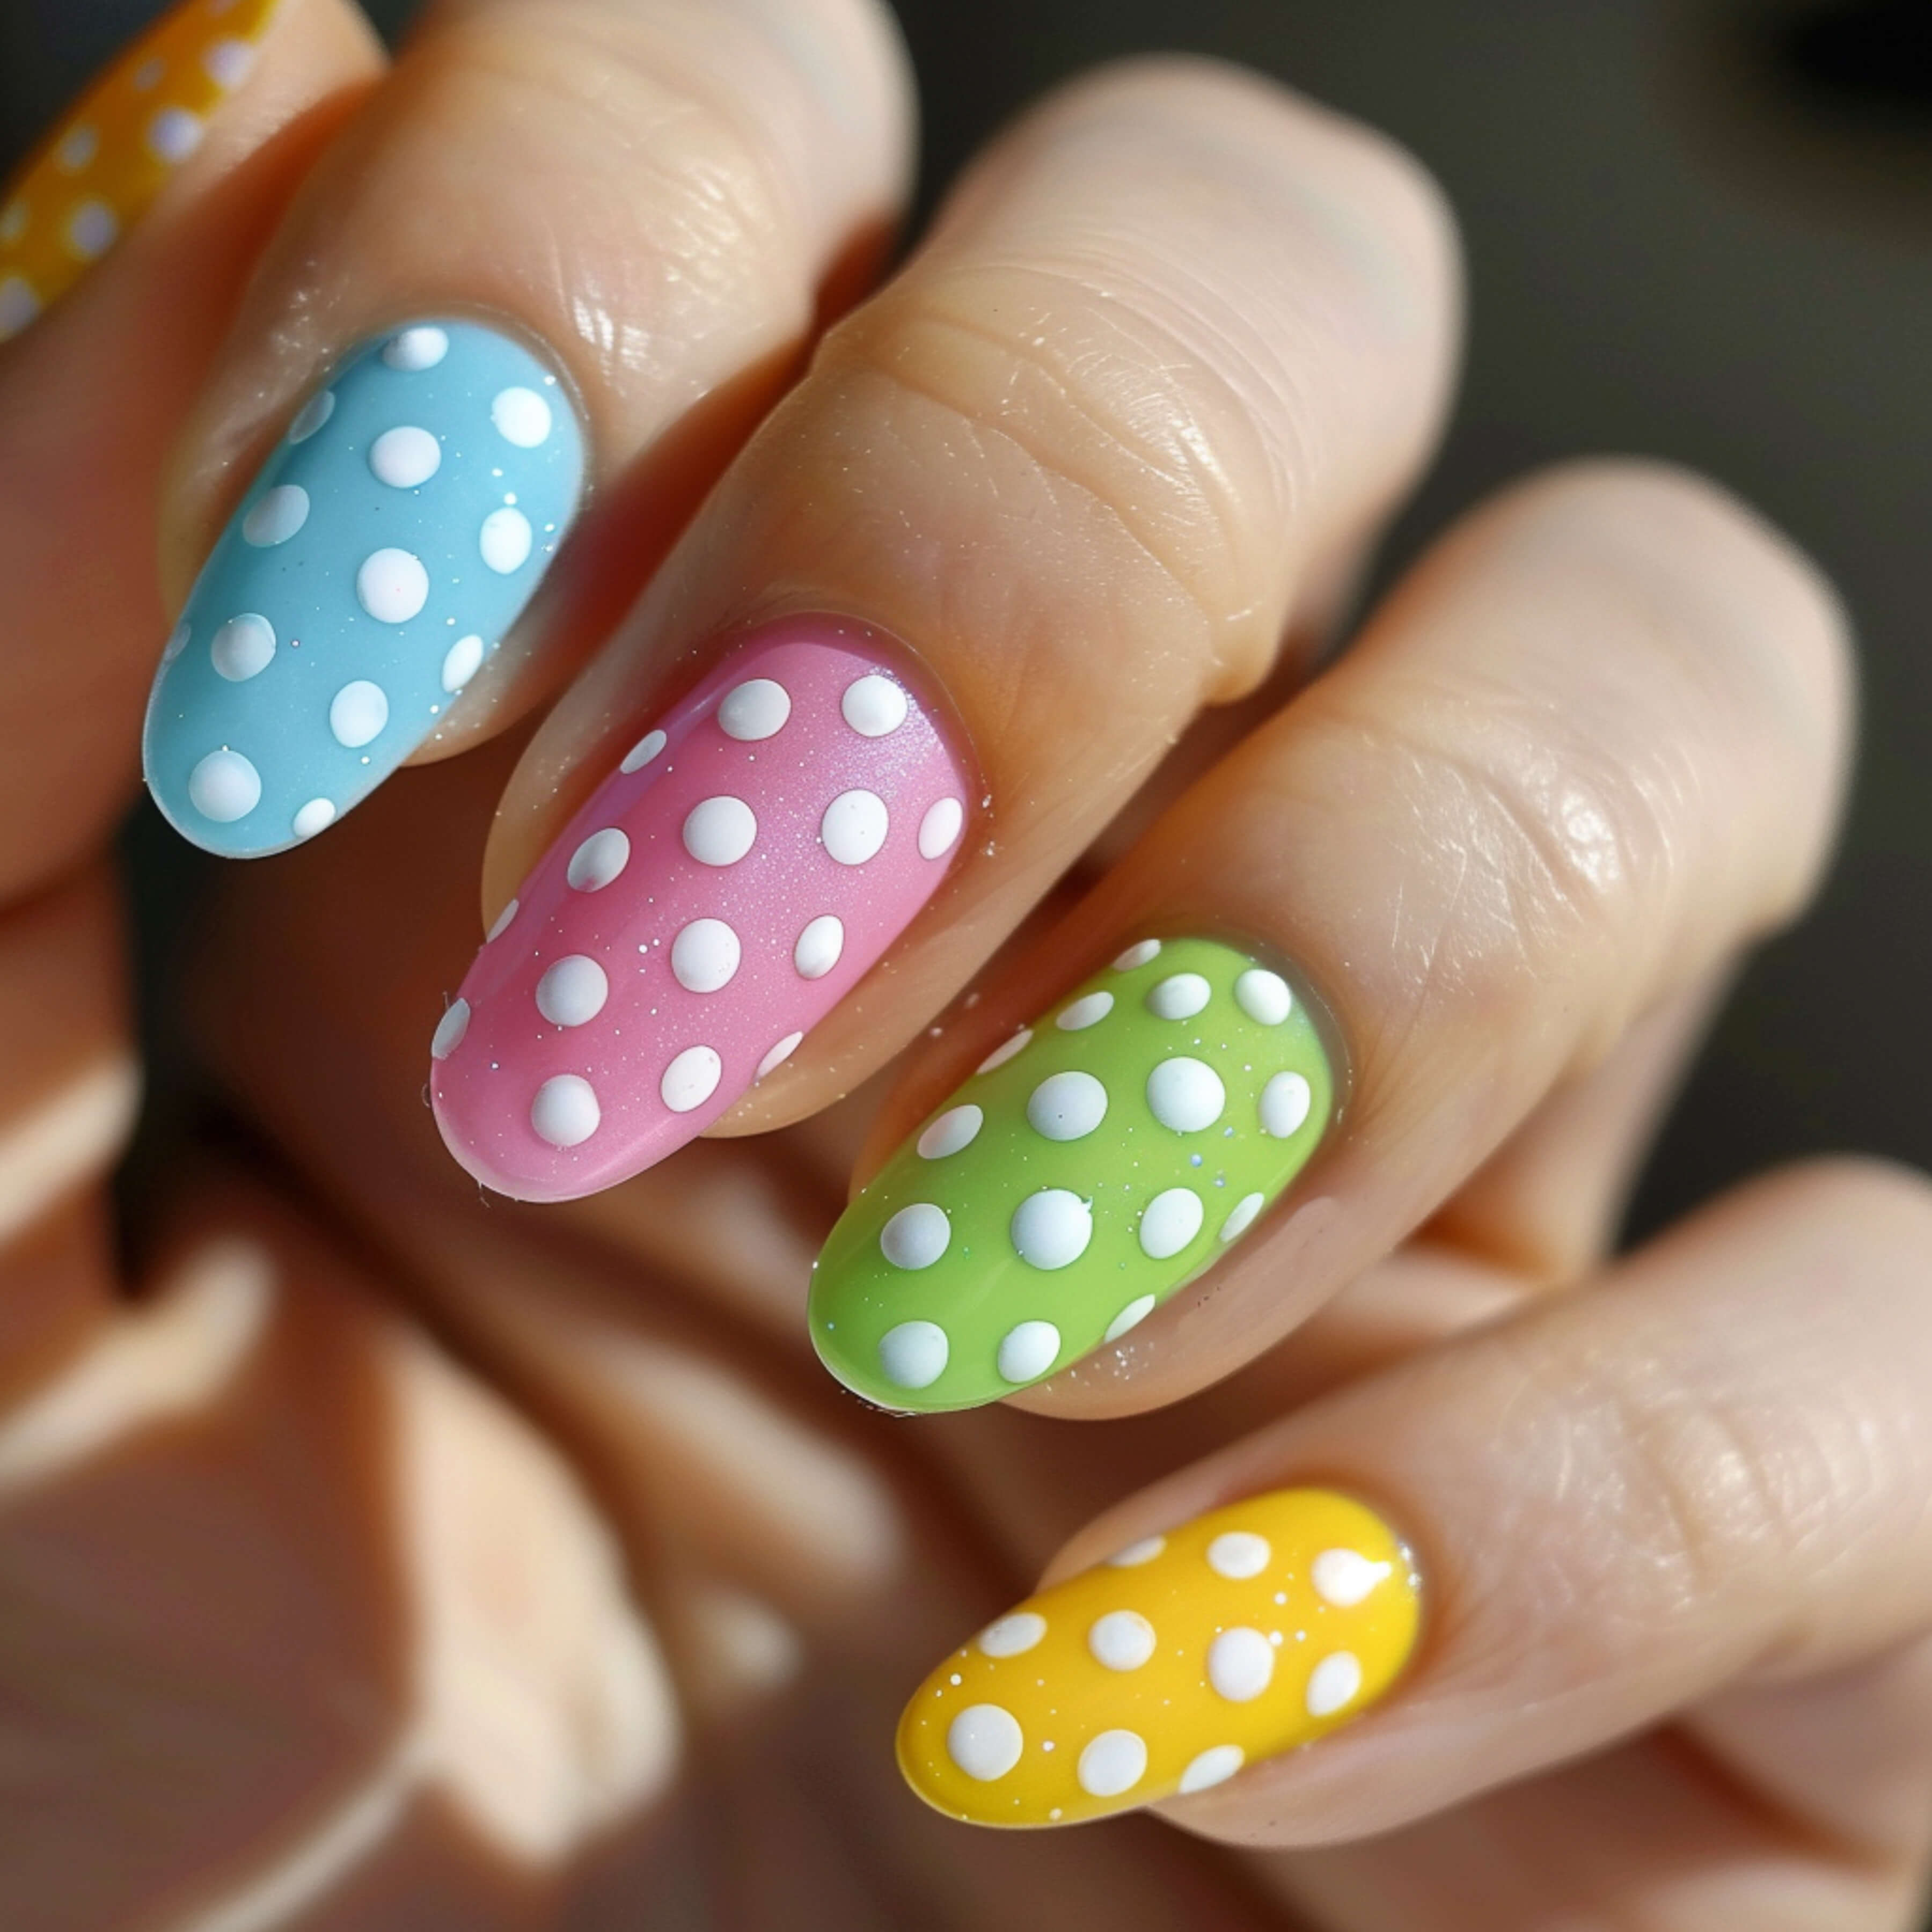 white dots on nails, index finger blue, middle pink, ring green and pinkie yellow